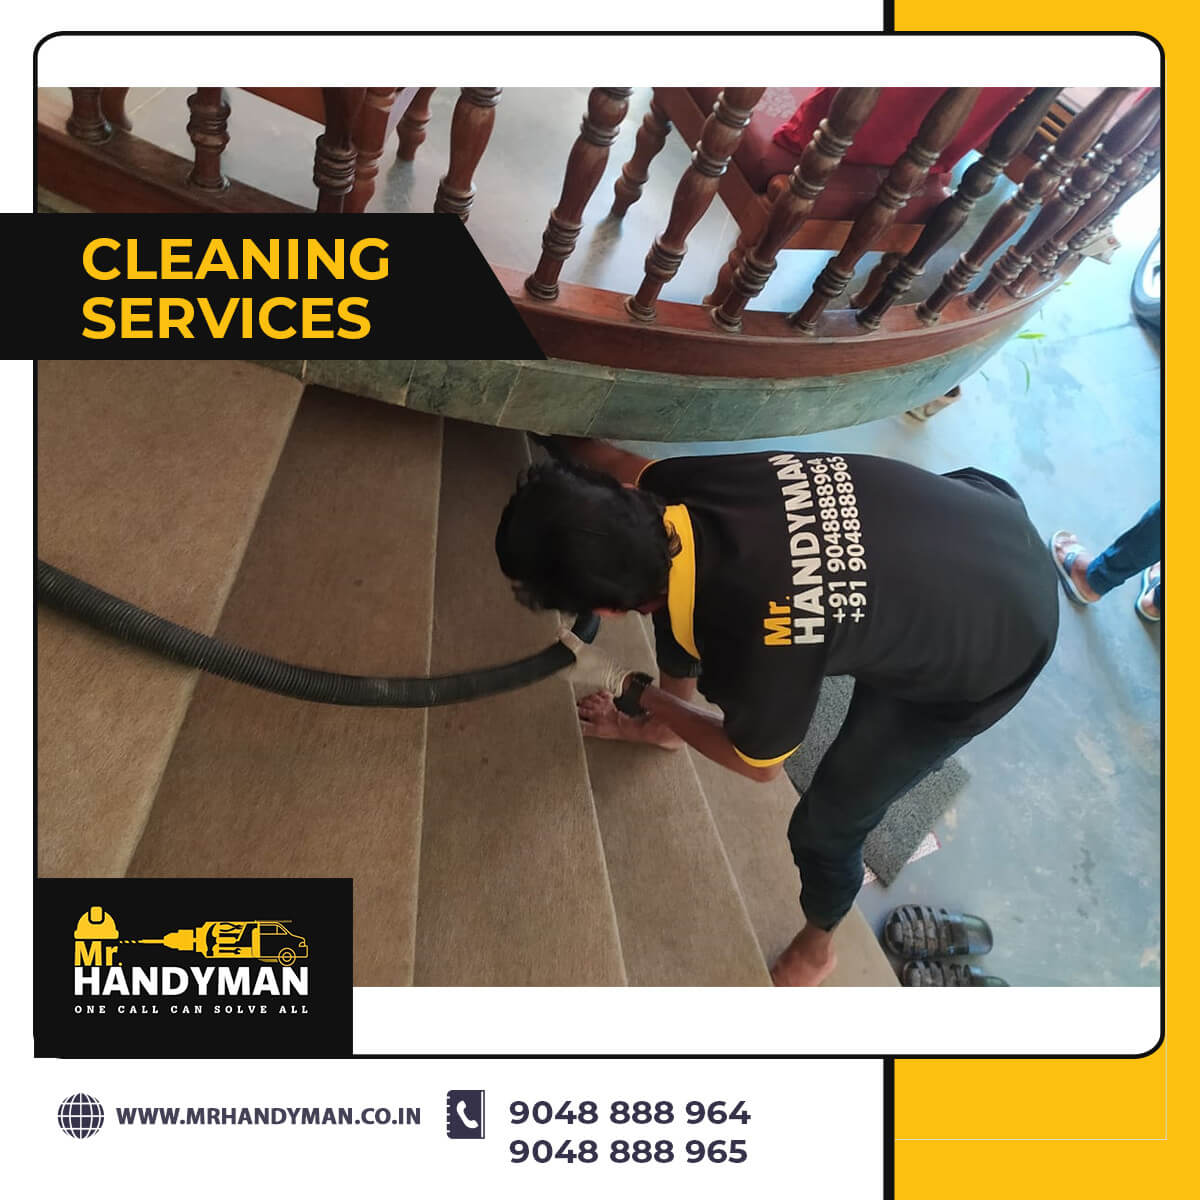 CLEANING-SERVICES-MR-HANDYMAN